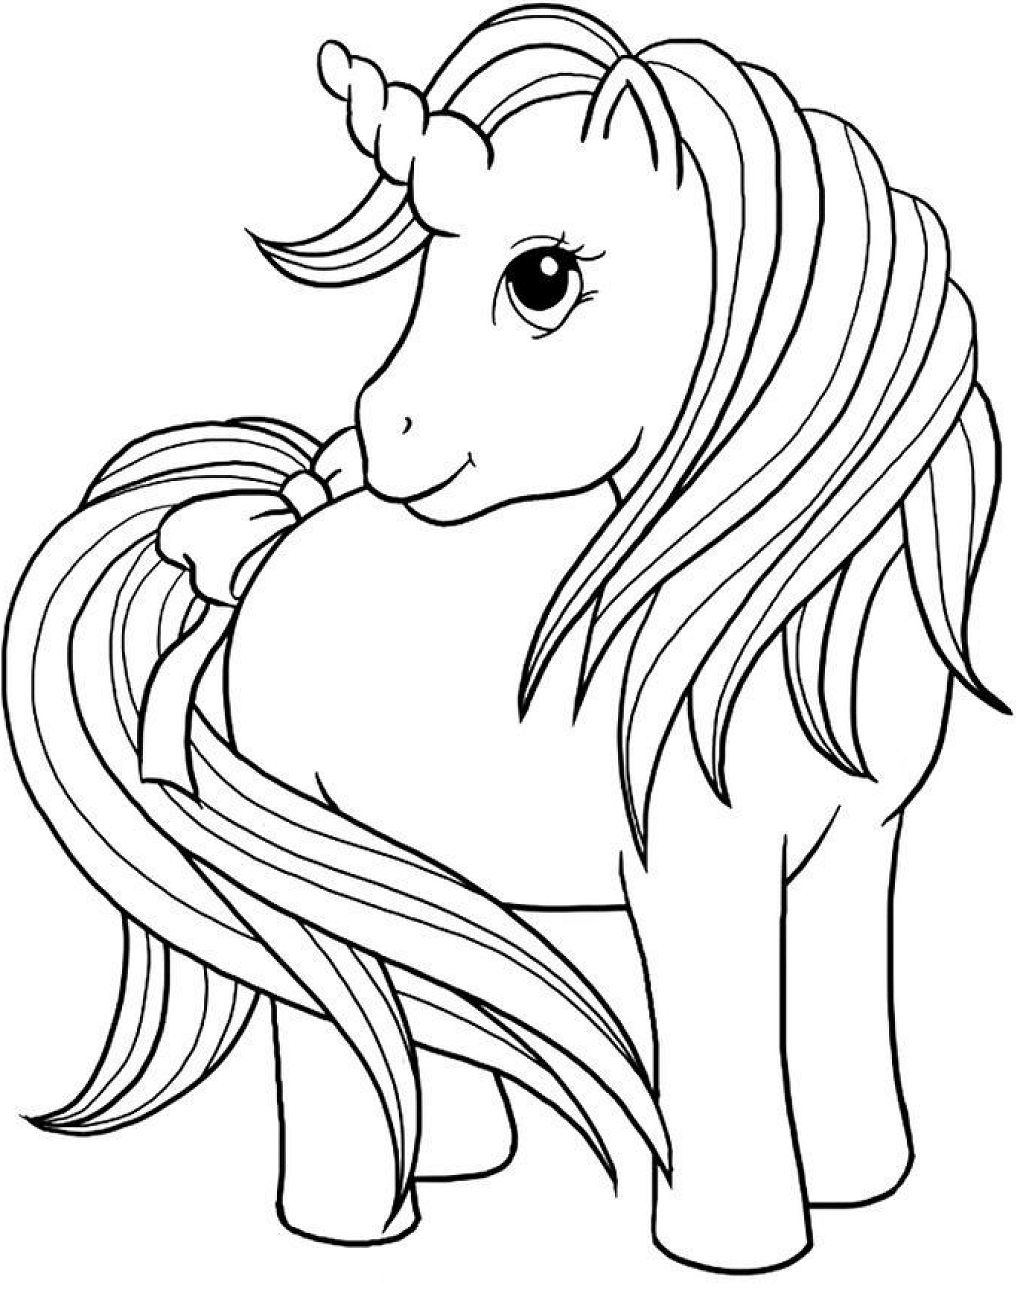 unicorn-with-bow-at-tail-coloring-page-free-printable-coloring-pages